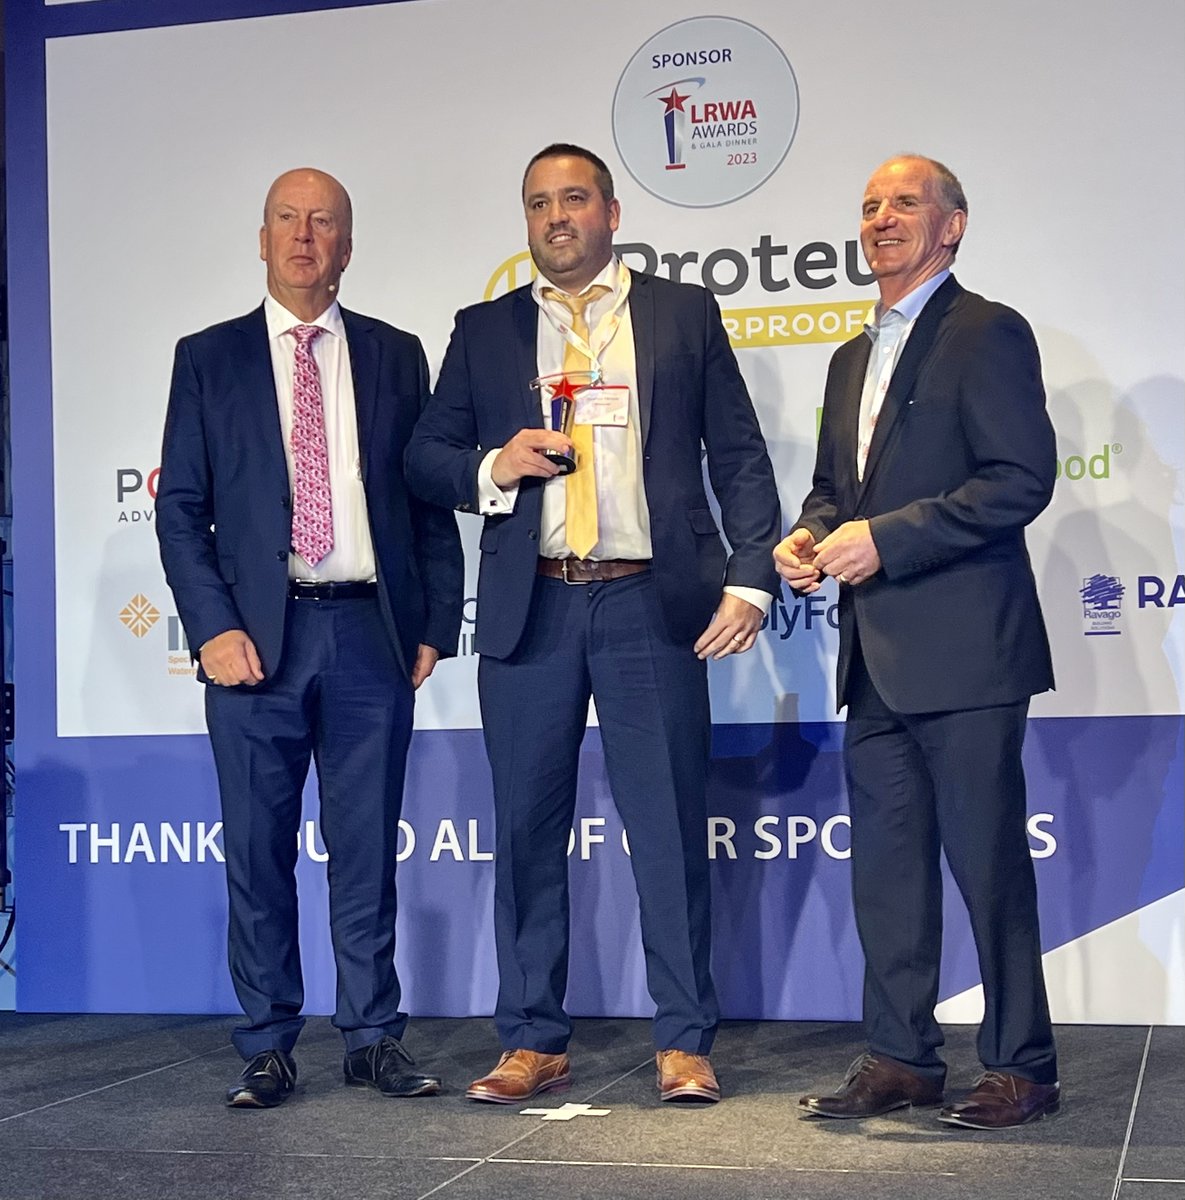 🍾 He’s only gone and done it! 🍾
GRAHAM HINDES is crowned ‘TRAINER OF THE YEAR’ at the #LRWAawards2023!
We couldn’t be more delighted for you Graham - all your hard work and dedication has done you proud!
#TeamWestWood #TrainerOfTheYear #training #waterproofing #WestWood